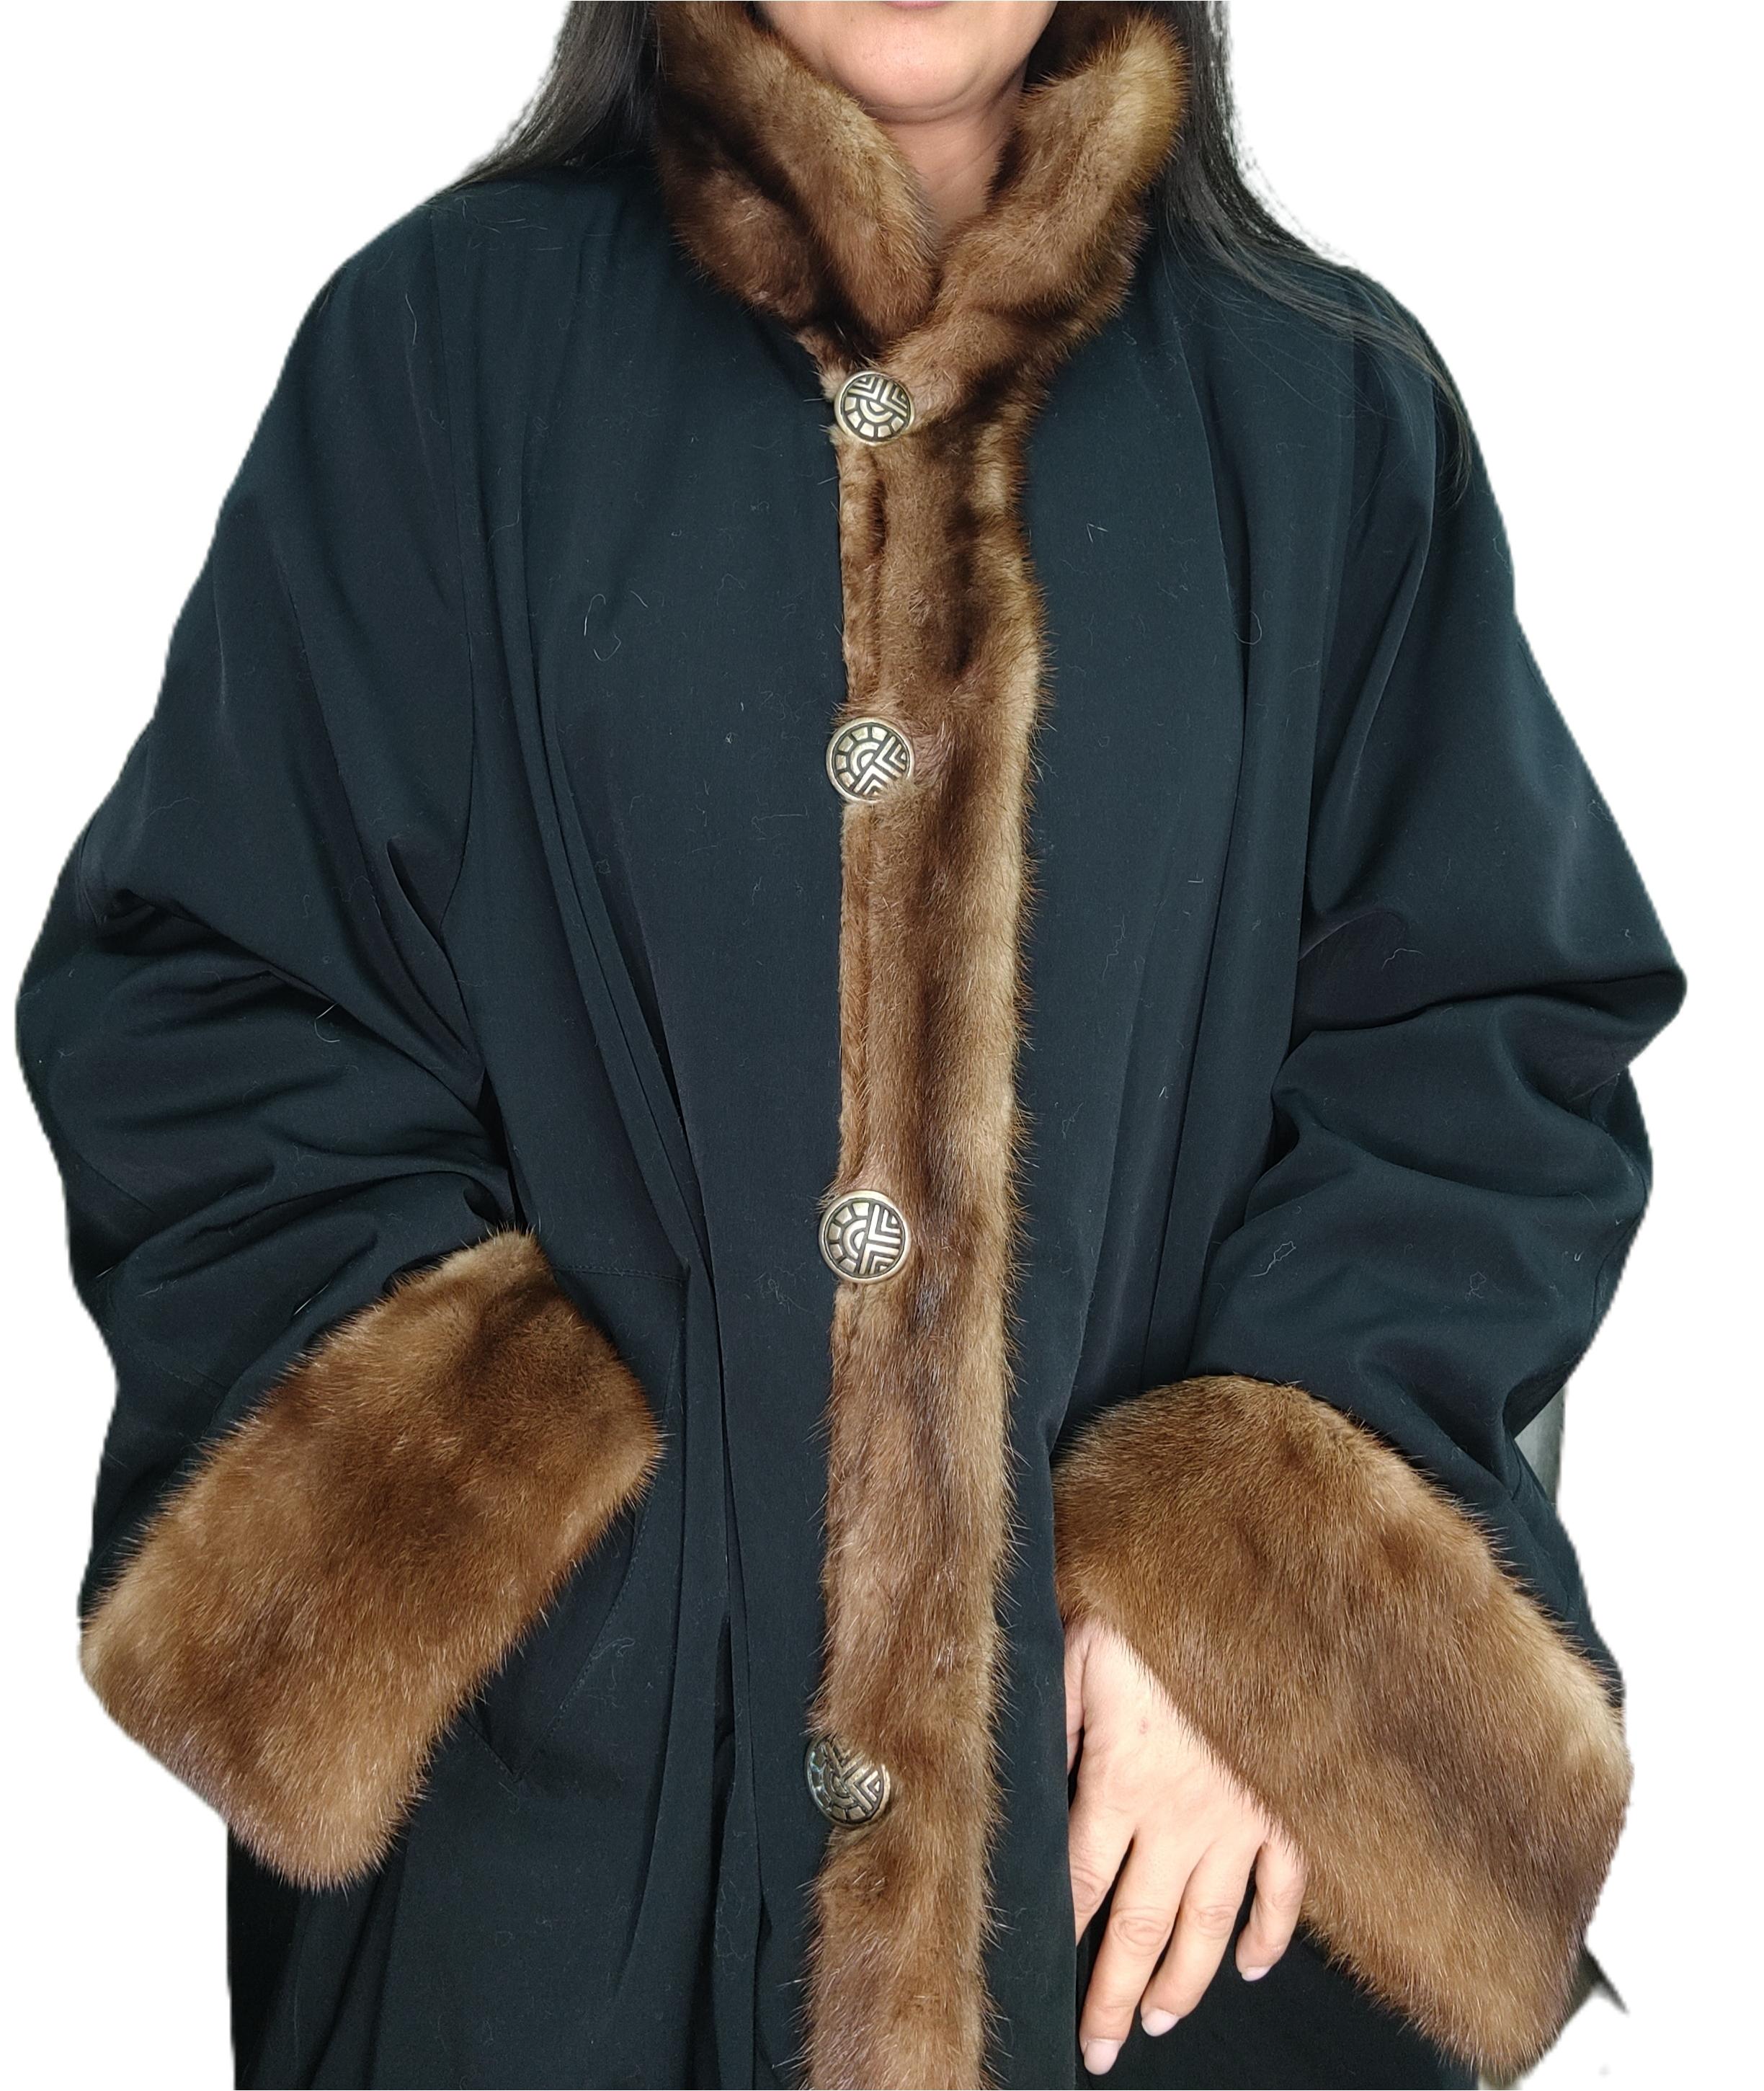 PRODUCT DESCRIPTION:

Brand New NOS Louis Ferraud Mink Fur Coat reversible size 24

Condition: Brand New

Closure: Buttons

Color: demi buff

Material: Mink

Garment type: Coat

Sleeves: bell folded double fur cuffs

Pockets: two pockets

Collar: